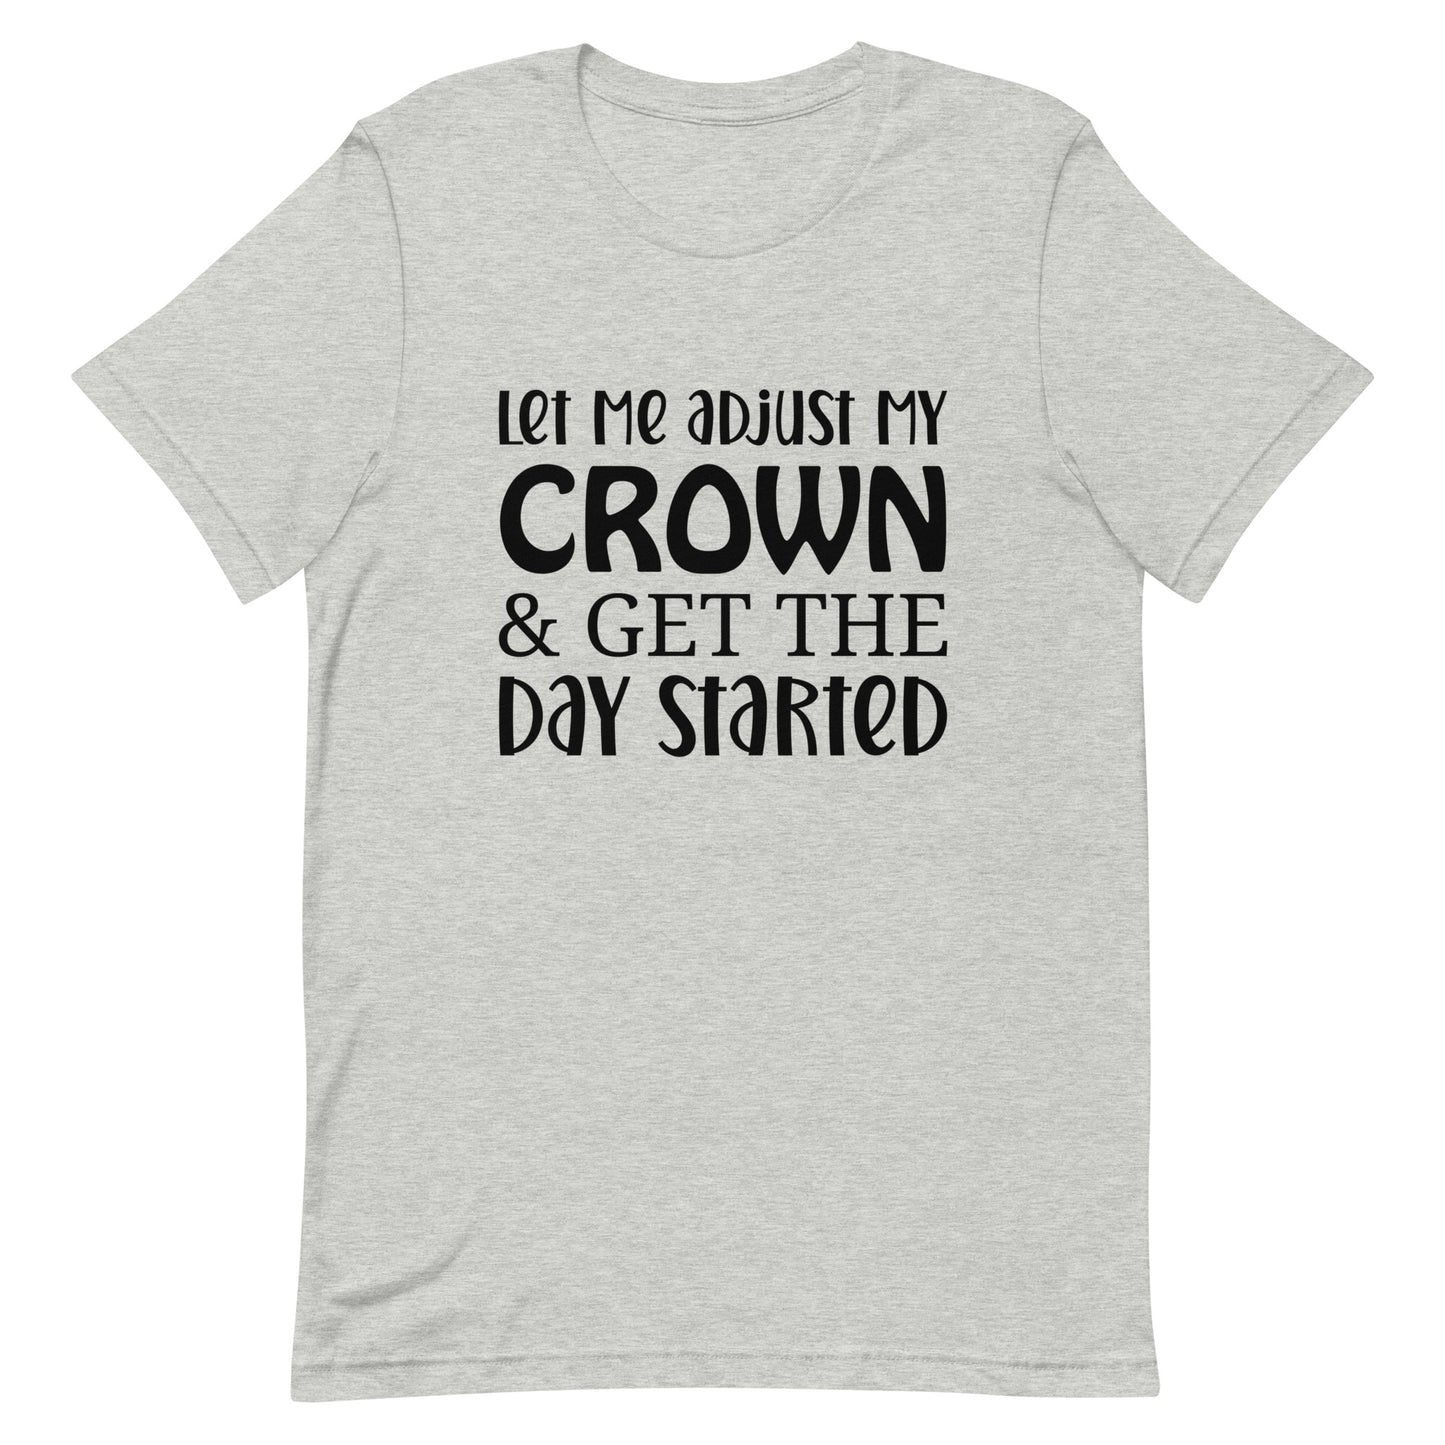 Let Me Adjust my Crown & Get the Day Started Unisex t-shirt